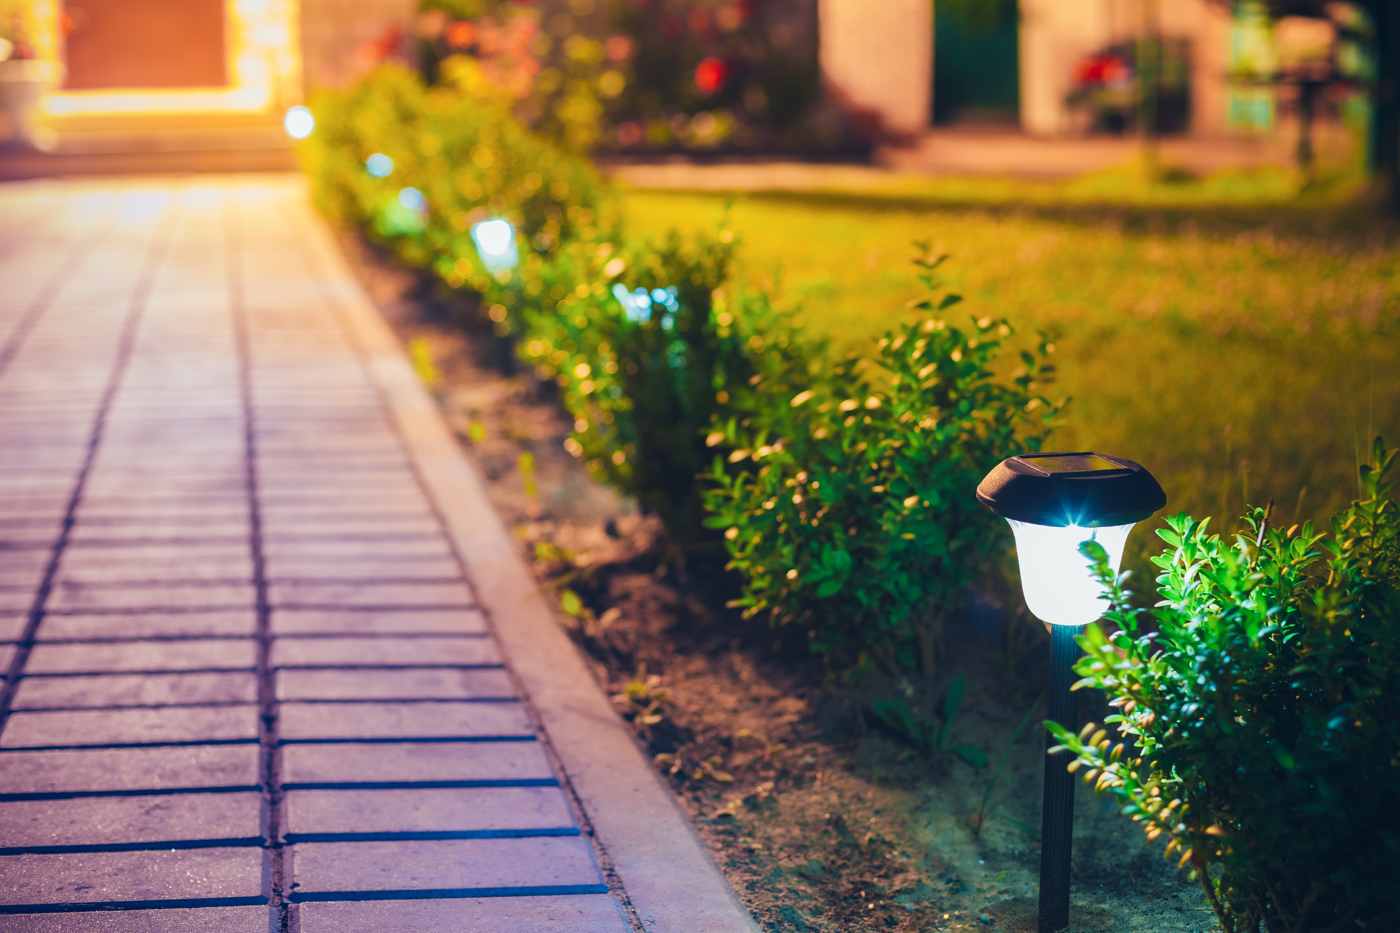 Lighting with motion detectors in the garden saves power led lamps for the garden path